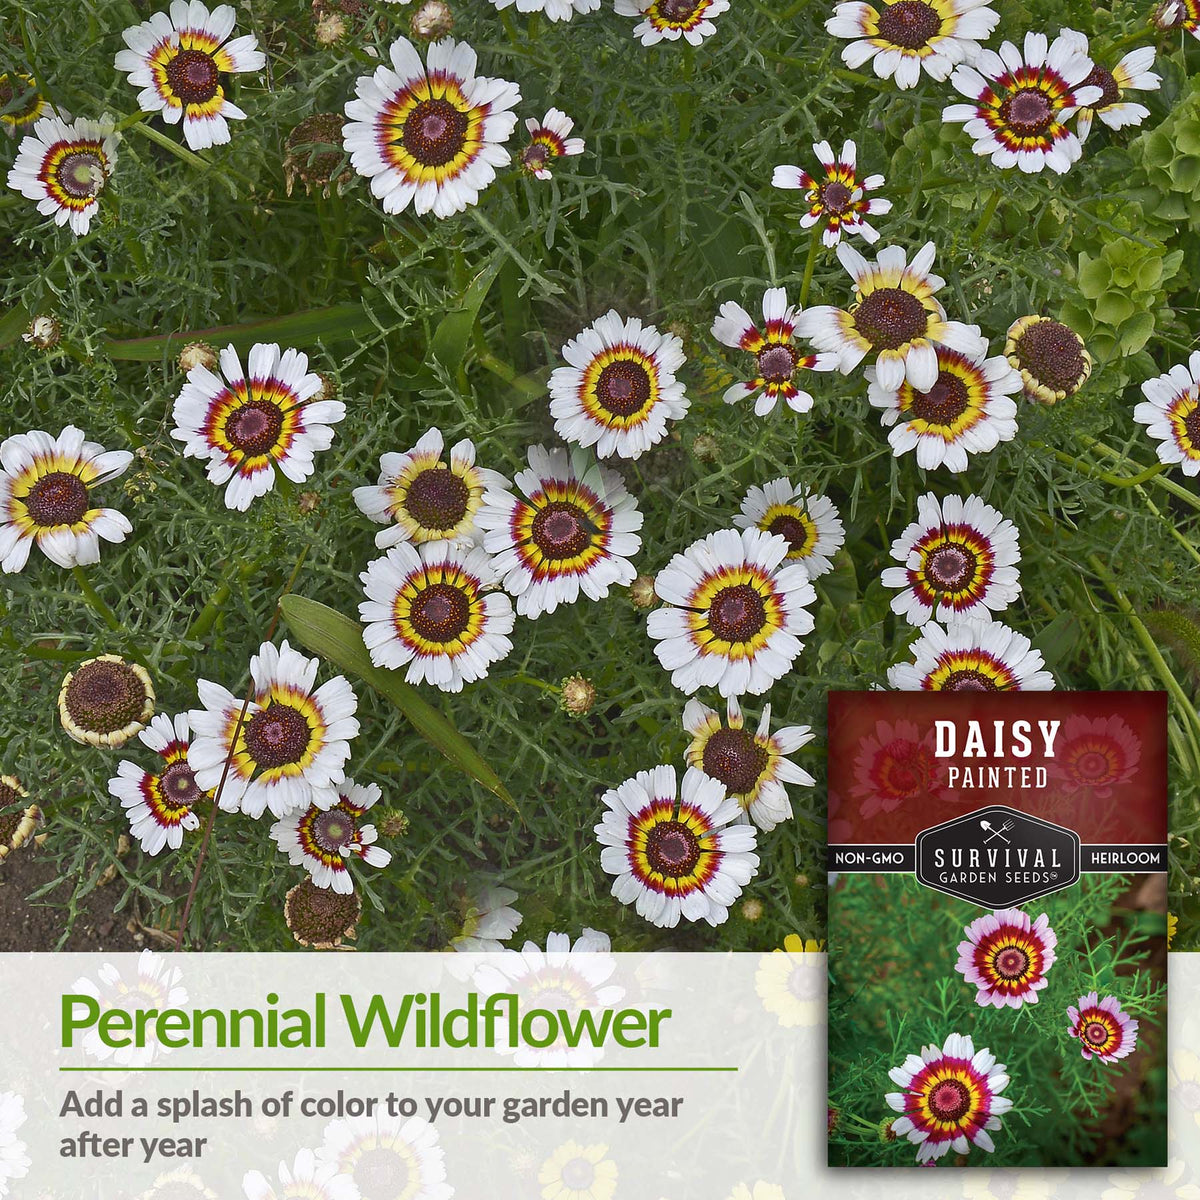 Painted daisies are a perennial wildflower